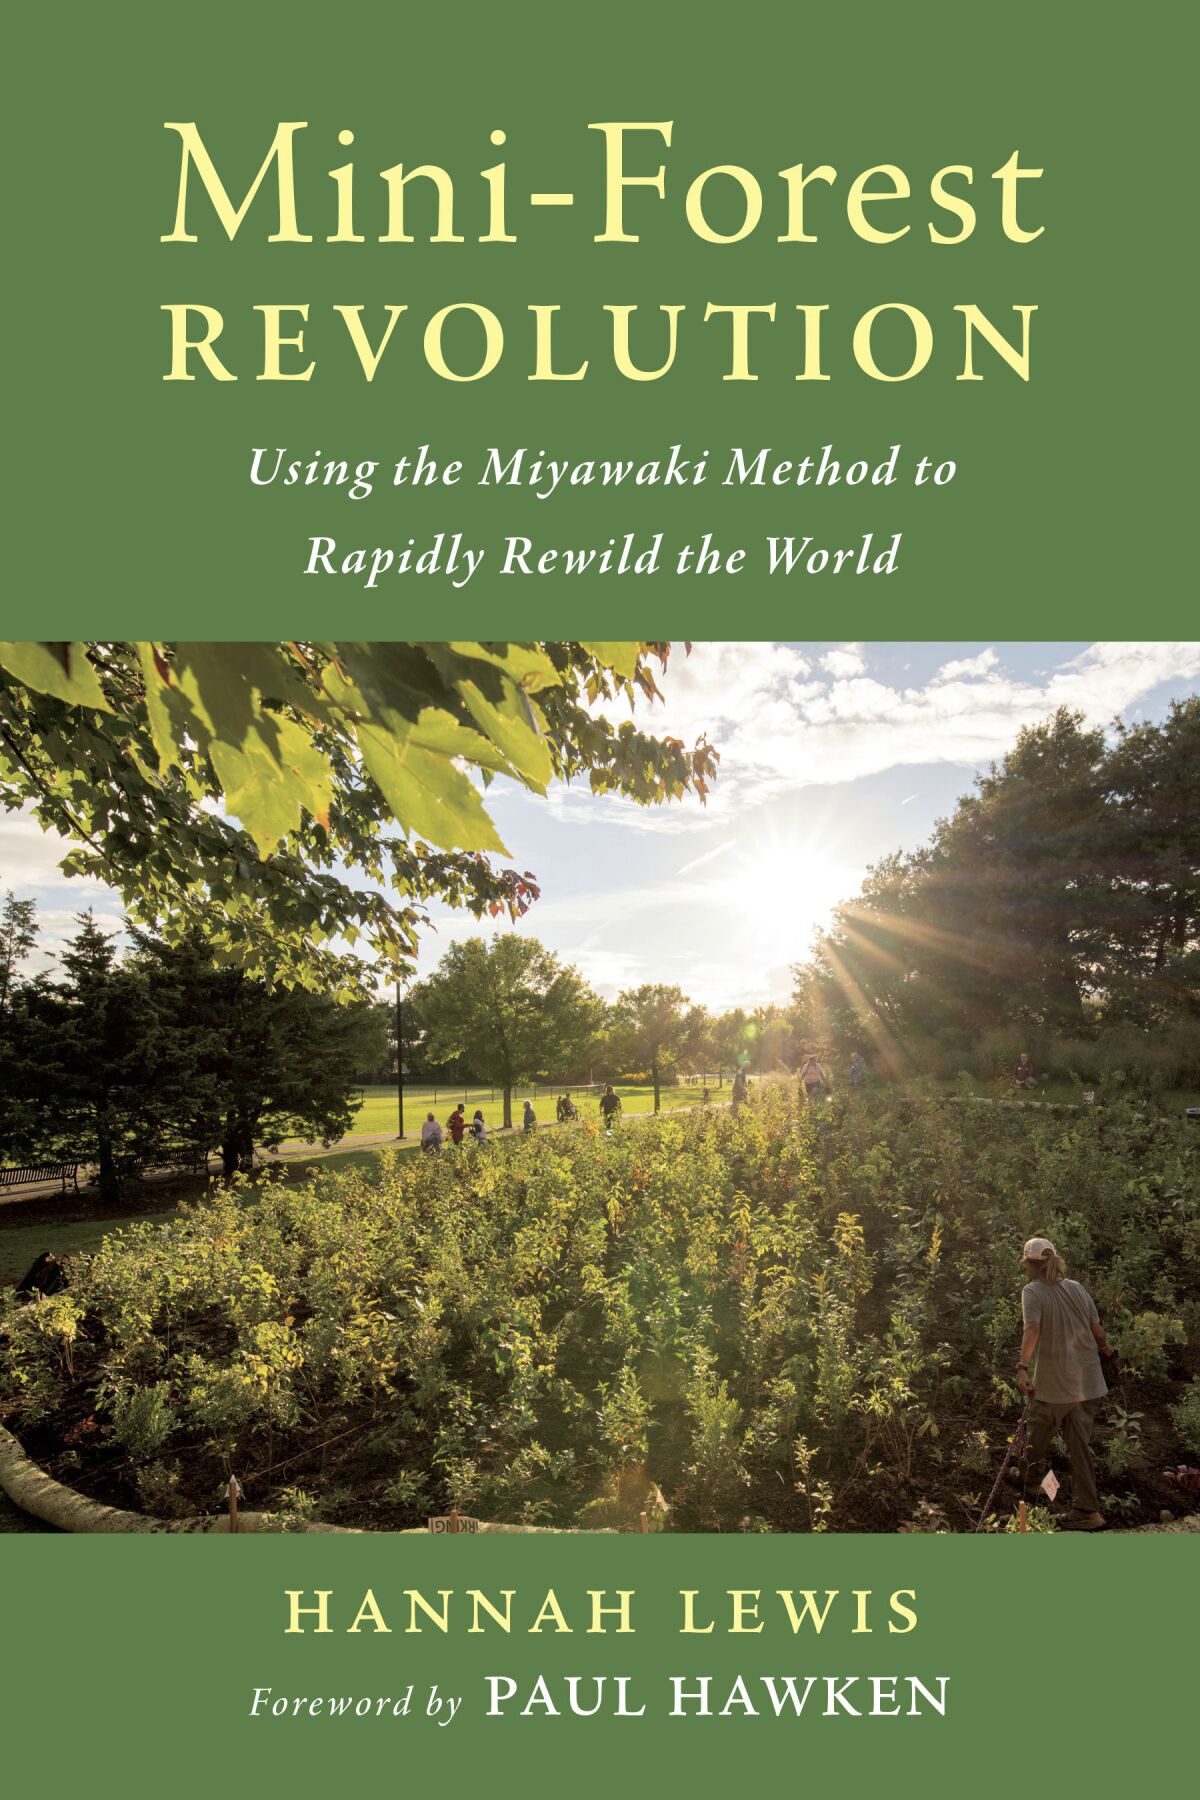 This cover image released by Chelsea Green shows "Mini-Forest Revolution: Using the Miyawaki Method to Rapidy Rewild the World" by Hannah Lewis. (Chelsea Green via AP)